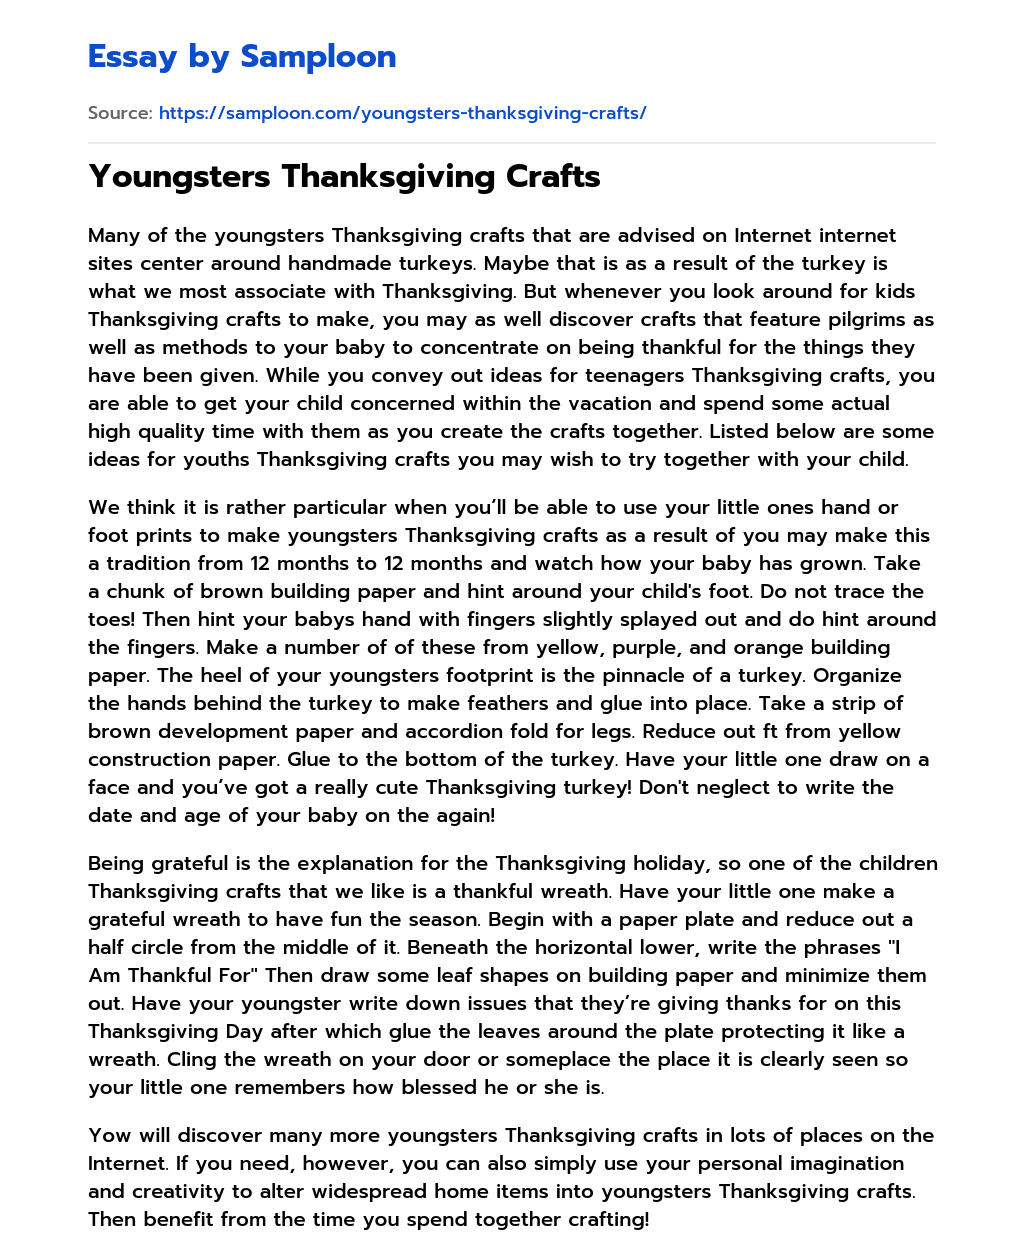 Youngsters Thanksgiving Crafts  essay